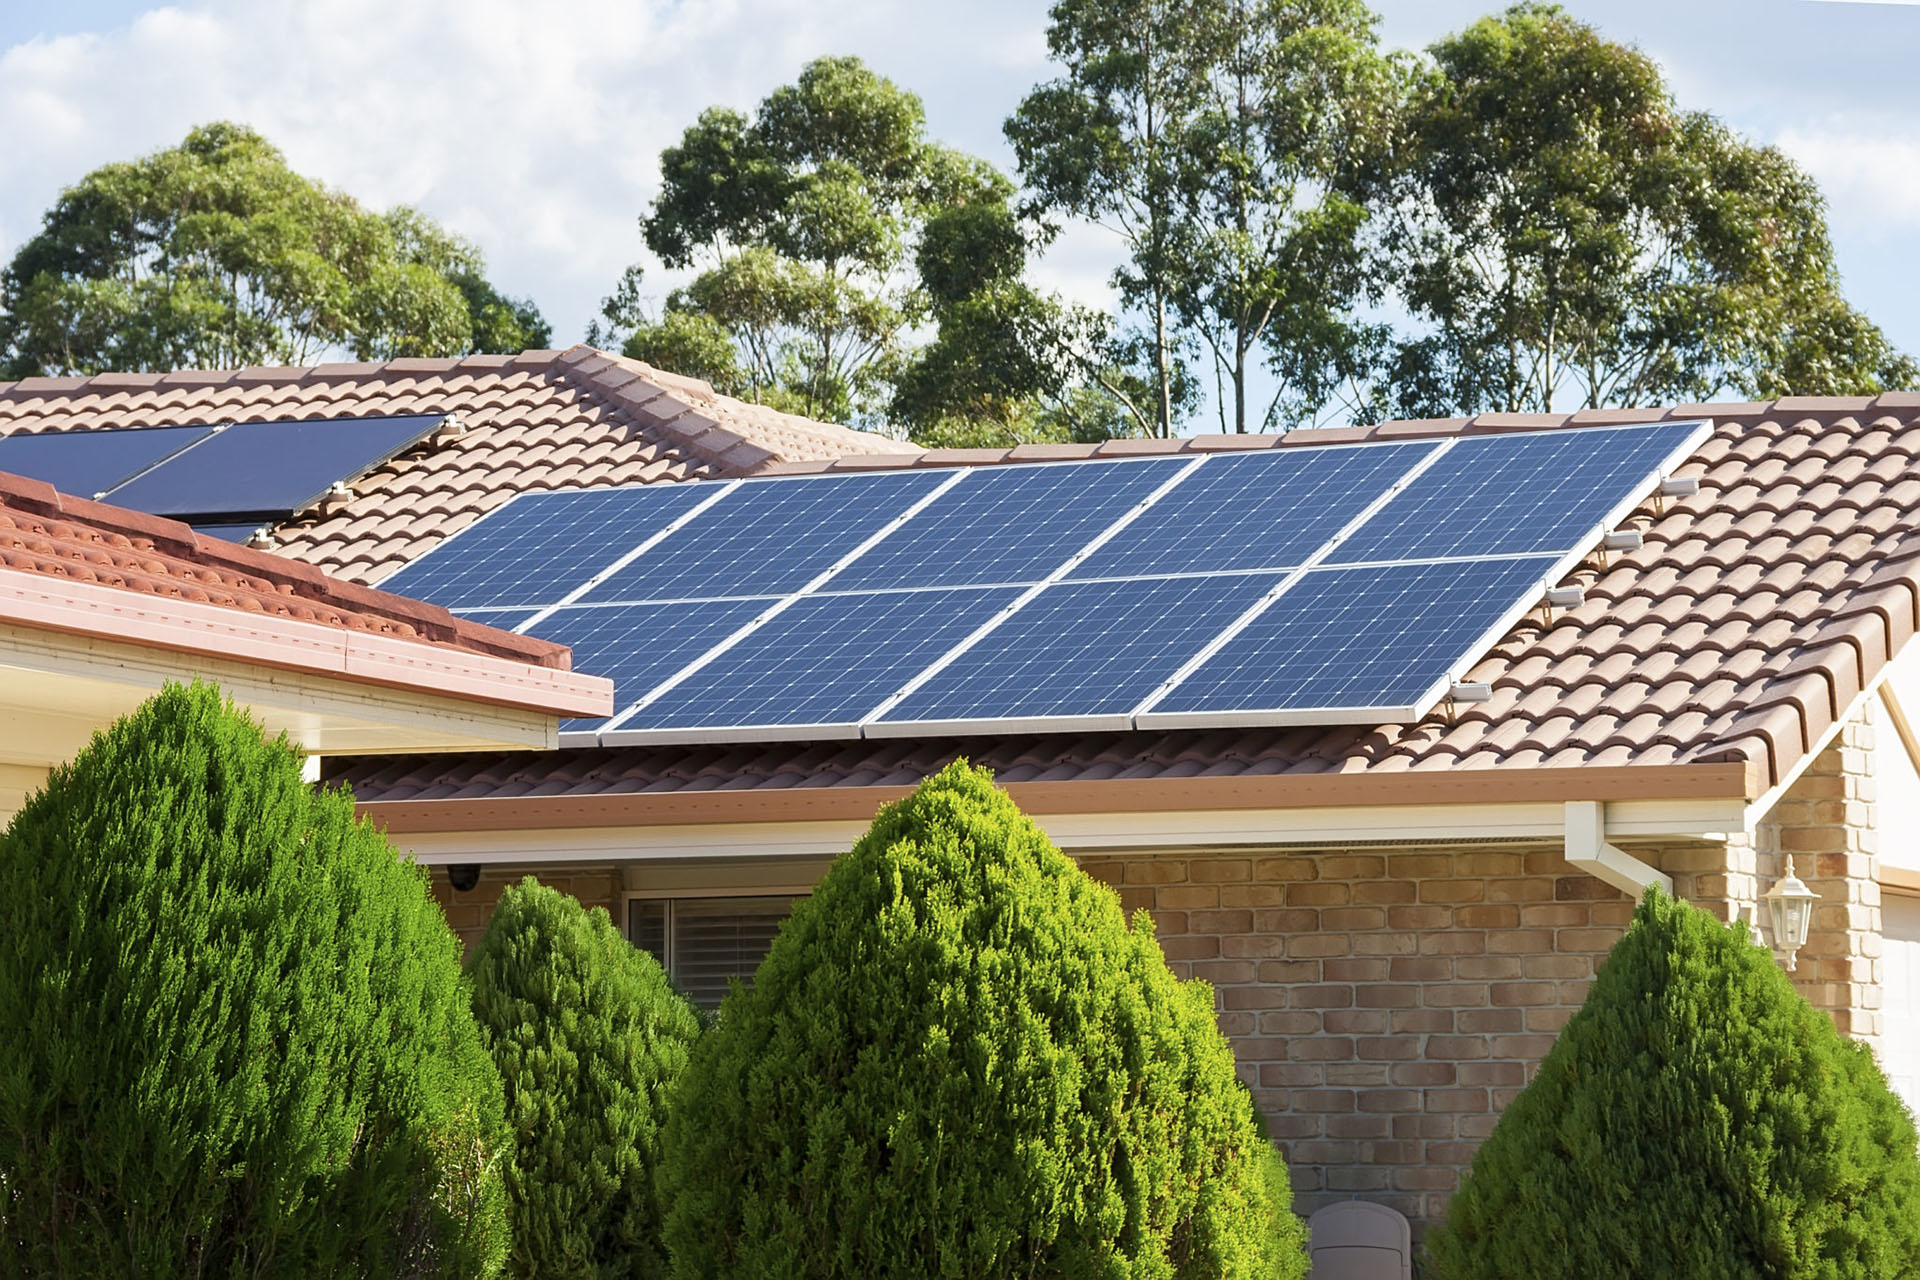 How long does it take to install residential solar panels